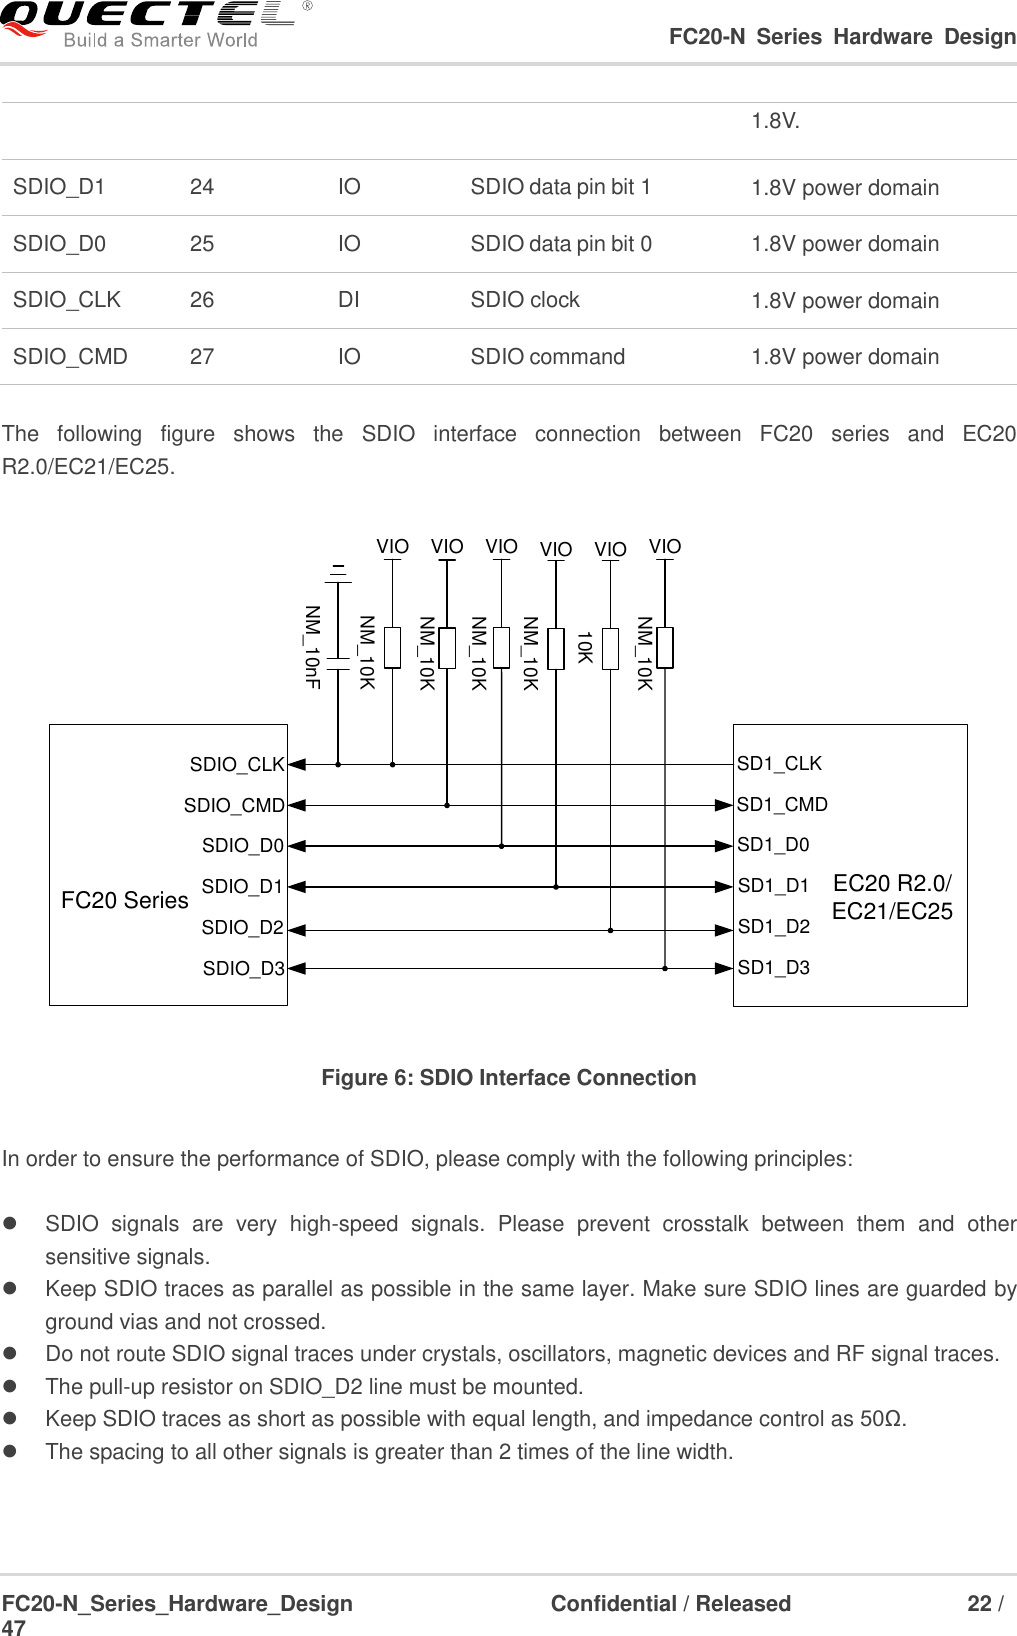                                                                                                                                     FC20-N  Series  Hardware  Design  FC20-N_Series_Hardware_Design                                Confidential / Released                    22 / 47    1.8V. SDIO_D1 24 IO SDIO data pin bit 1 1.8V power domain SDIO_D0 25 IO SDIO data pin bit 0 1.8V power domain SDIO_CLK 26 DI SDIO clock 1.8V power domain SDIO_CMD 27 IO SDIO command 1.8V power domain  The  following  figure  shows  the  SDIO  interface  connection  between  FC20  series  and  EC20 R2.0/EC21/EC25. SDIO_CLKSDIO_CMDSDIO_D0SDIO_D1SDIO_D2SDIO_D3EC20 R2.0/EC21/EC25FC20 SeriesSD1_D0SD1_D1SD1_D2SD1_D3SD1_CLKSD1_CMD10KNM_10KVIO VIO VIO VIO VIO VIONM_10KNM_10KNM_10KNM_10KNM_10nF Figure 6: SDIO Interface Connection  In order to ensure the performance of SDIO, please comply with the following principles:    SDIO  signals  are  very  high-speed  signals.  Please  prevent  crosstalk  between  them  and  other sensitive signals.   Keep SDIO traces as parallel as possible in the same layer. Make sure SDIO lines are guarded by ground vias and not crossed.   Do not route SDIO signal traces under crystals, oscillators, magnetic devices and RF signal traces.   The pull-up resistor on SDIO_D2 line must be mounted.   Keep SDIO traces as short as possible with equal length, and impedance control as 50Ω.   The spacing to all other signals is greater than 2 times of the line width.  